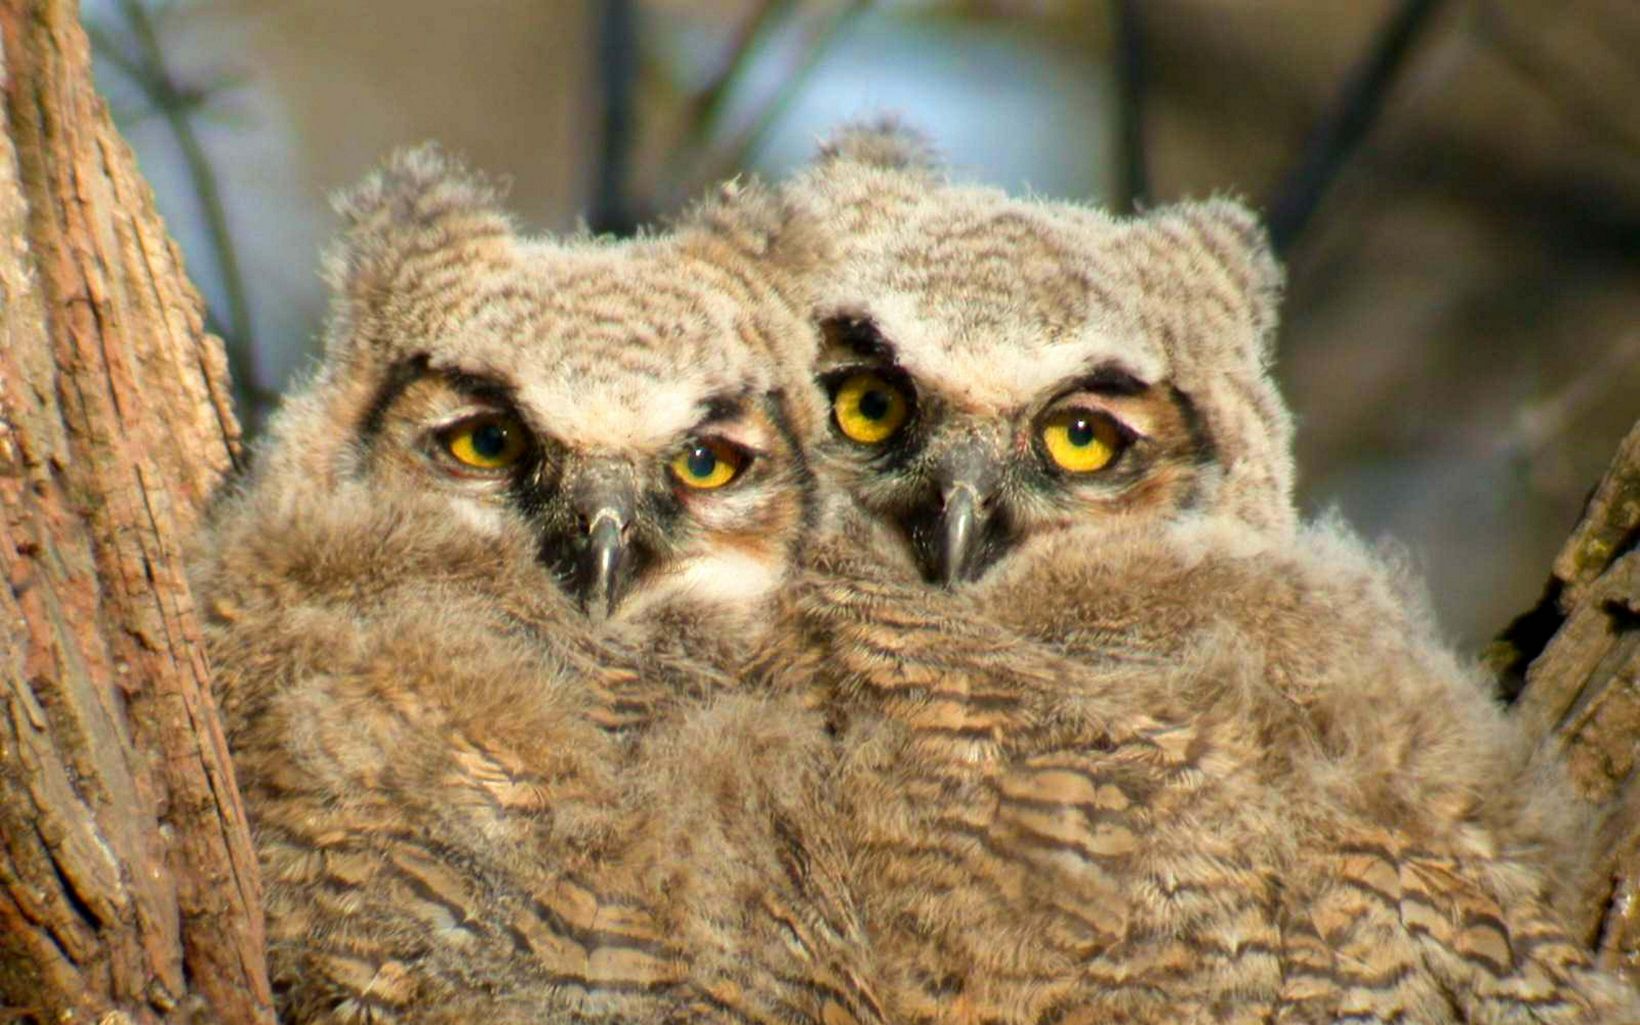 Two fuzzy great horned owl chicks nestled together in a tree.